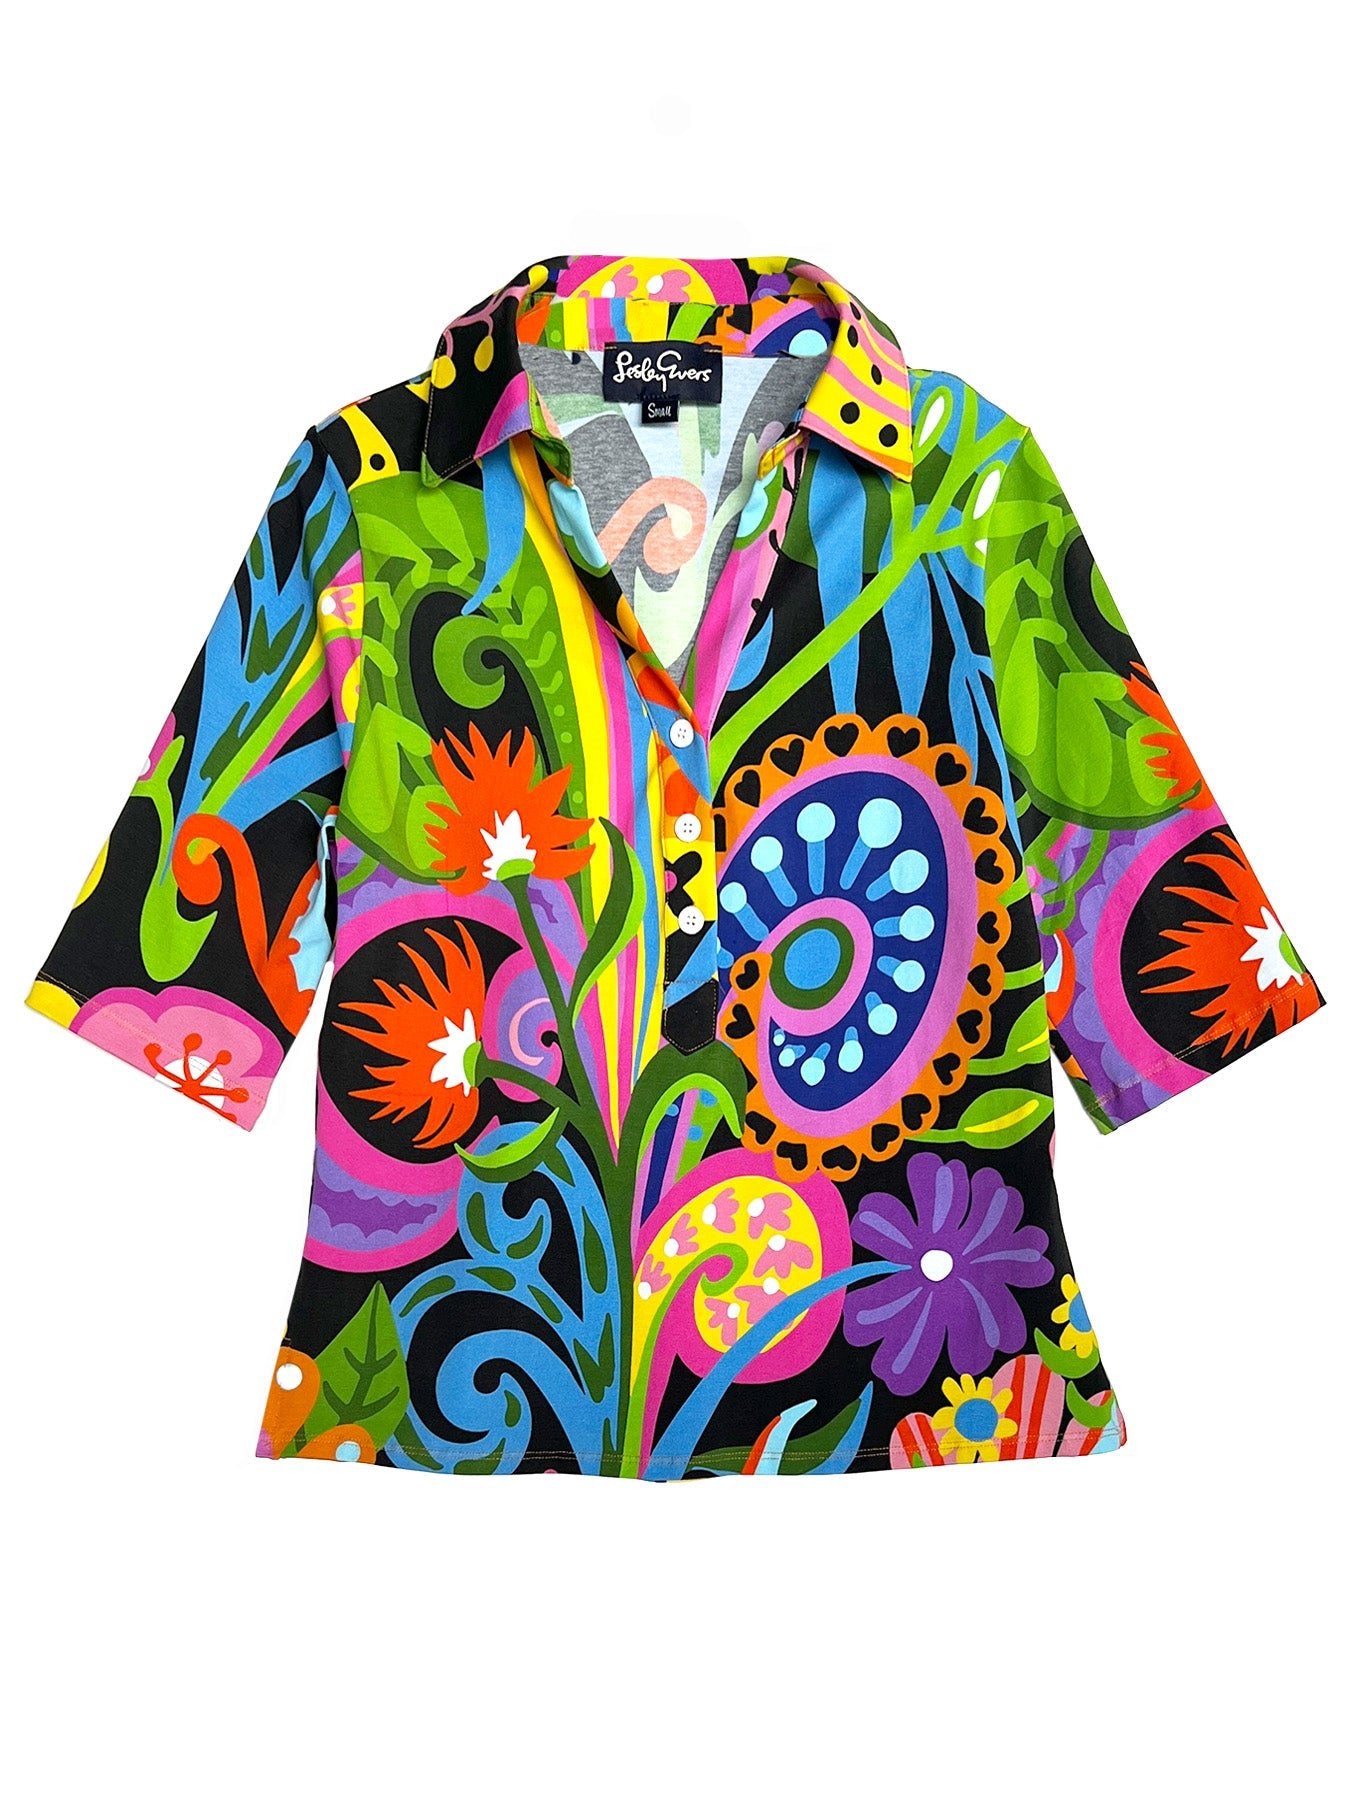 KIMMY top Bonanza - Lesley Evers-Button Top-clothing-colorful